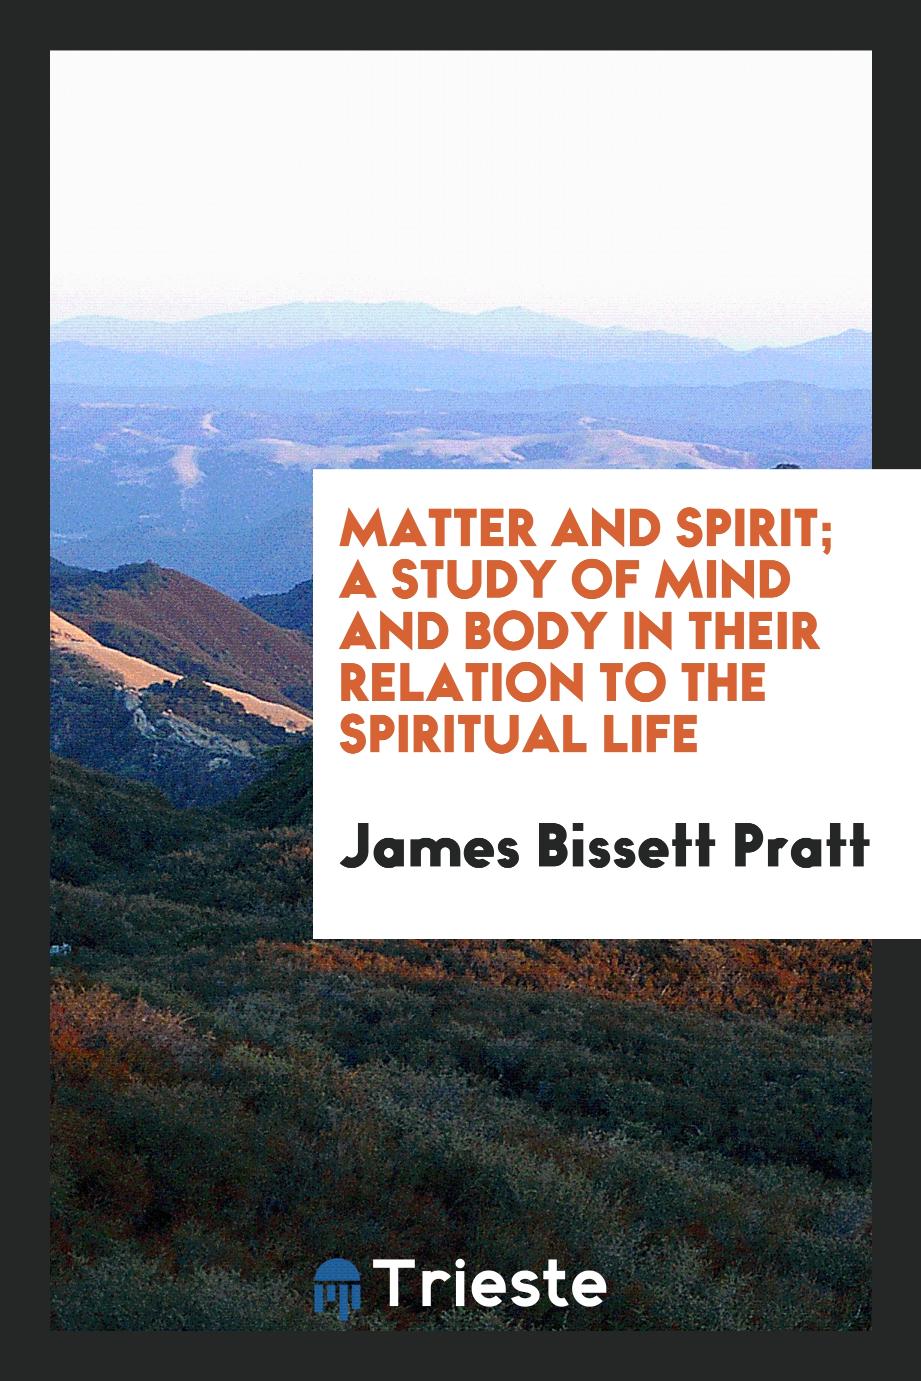 Matter and spirit; a study of mind and body in their relation to the spiritual life